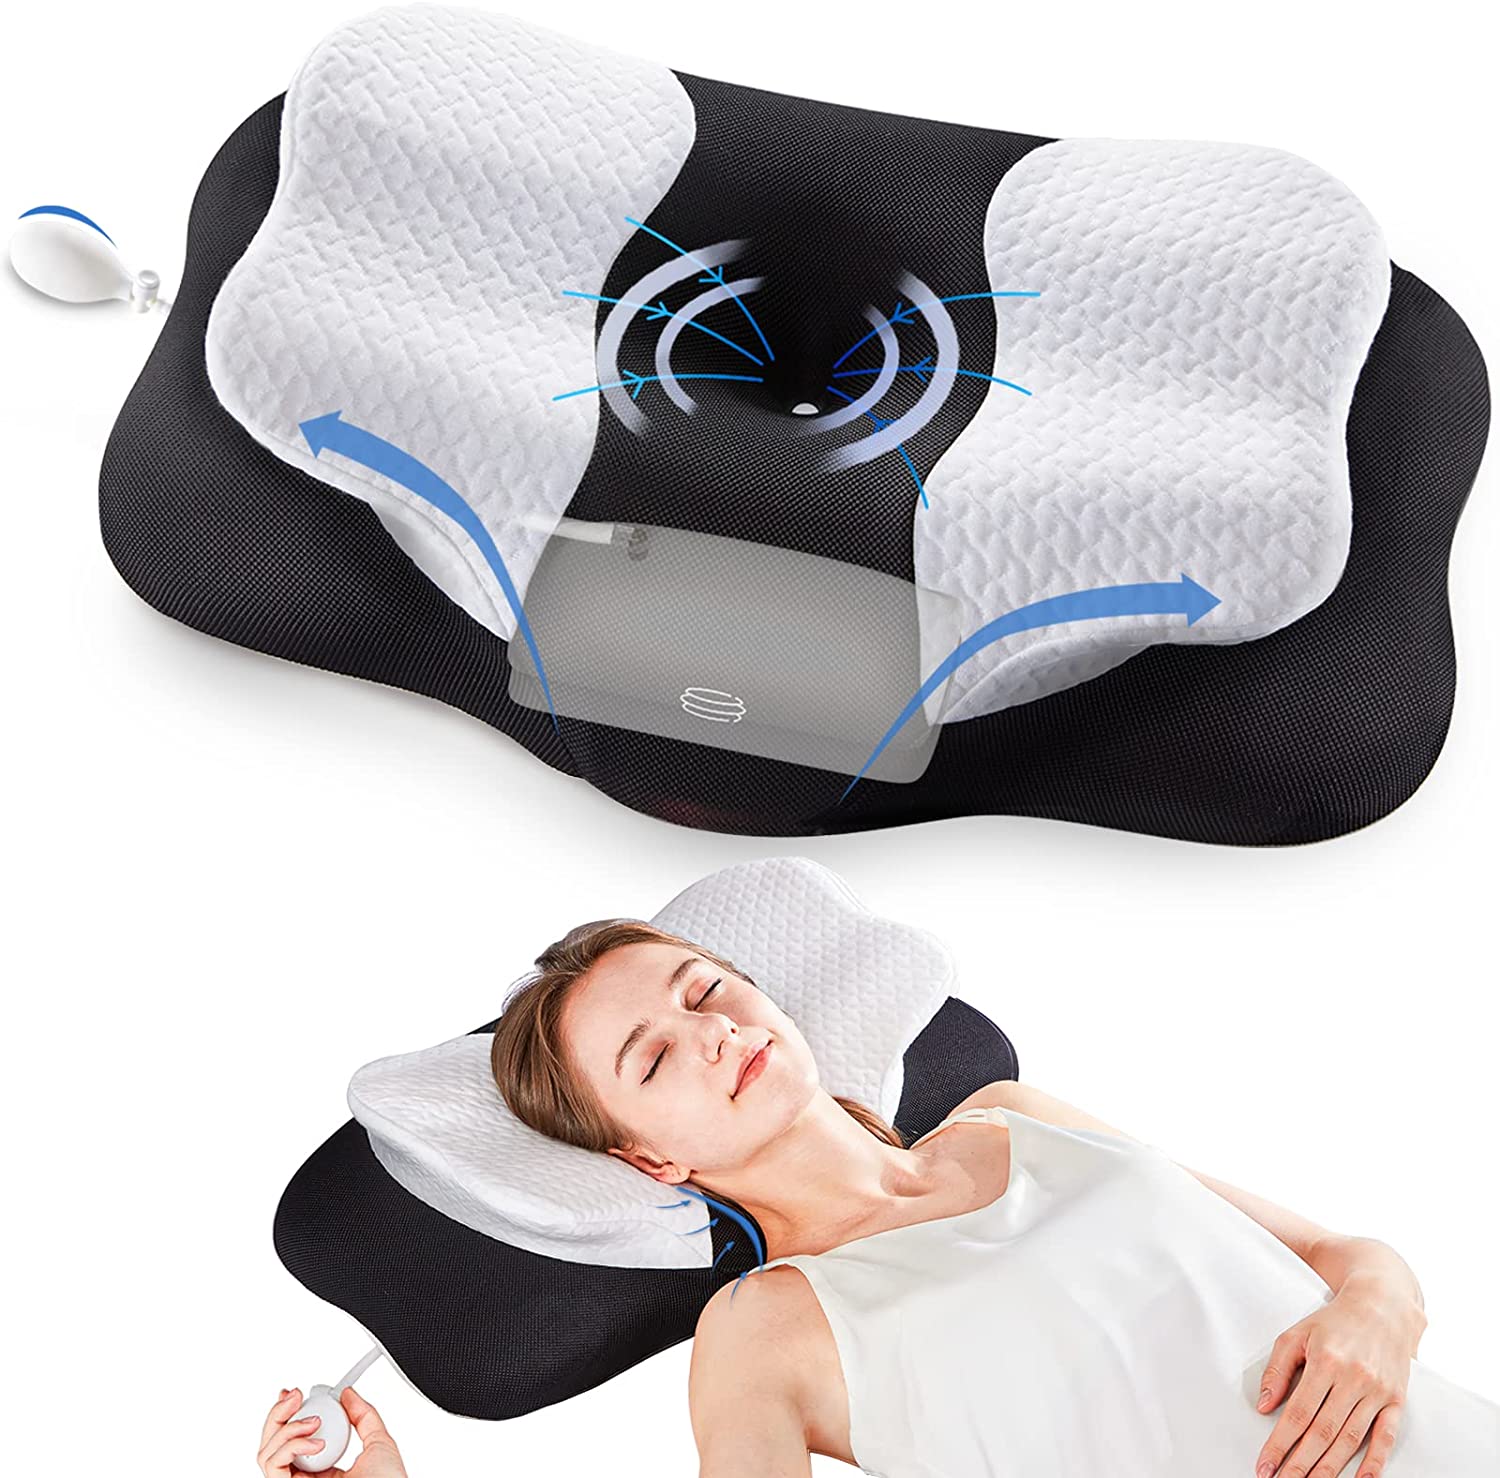 Cervical Memory Foam Pillows, Side Sleeper Pillow for Neck Shoulder Pain Relive Orthopedic Contour Ergonomic Inflatable Height Adjustable Pillows with Air Bag for Back Stomach Sleepers